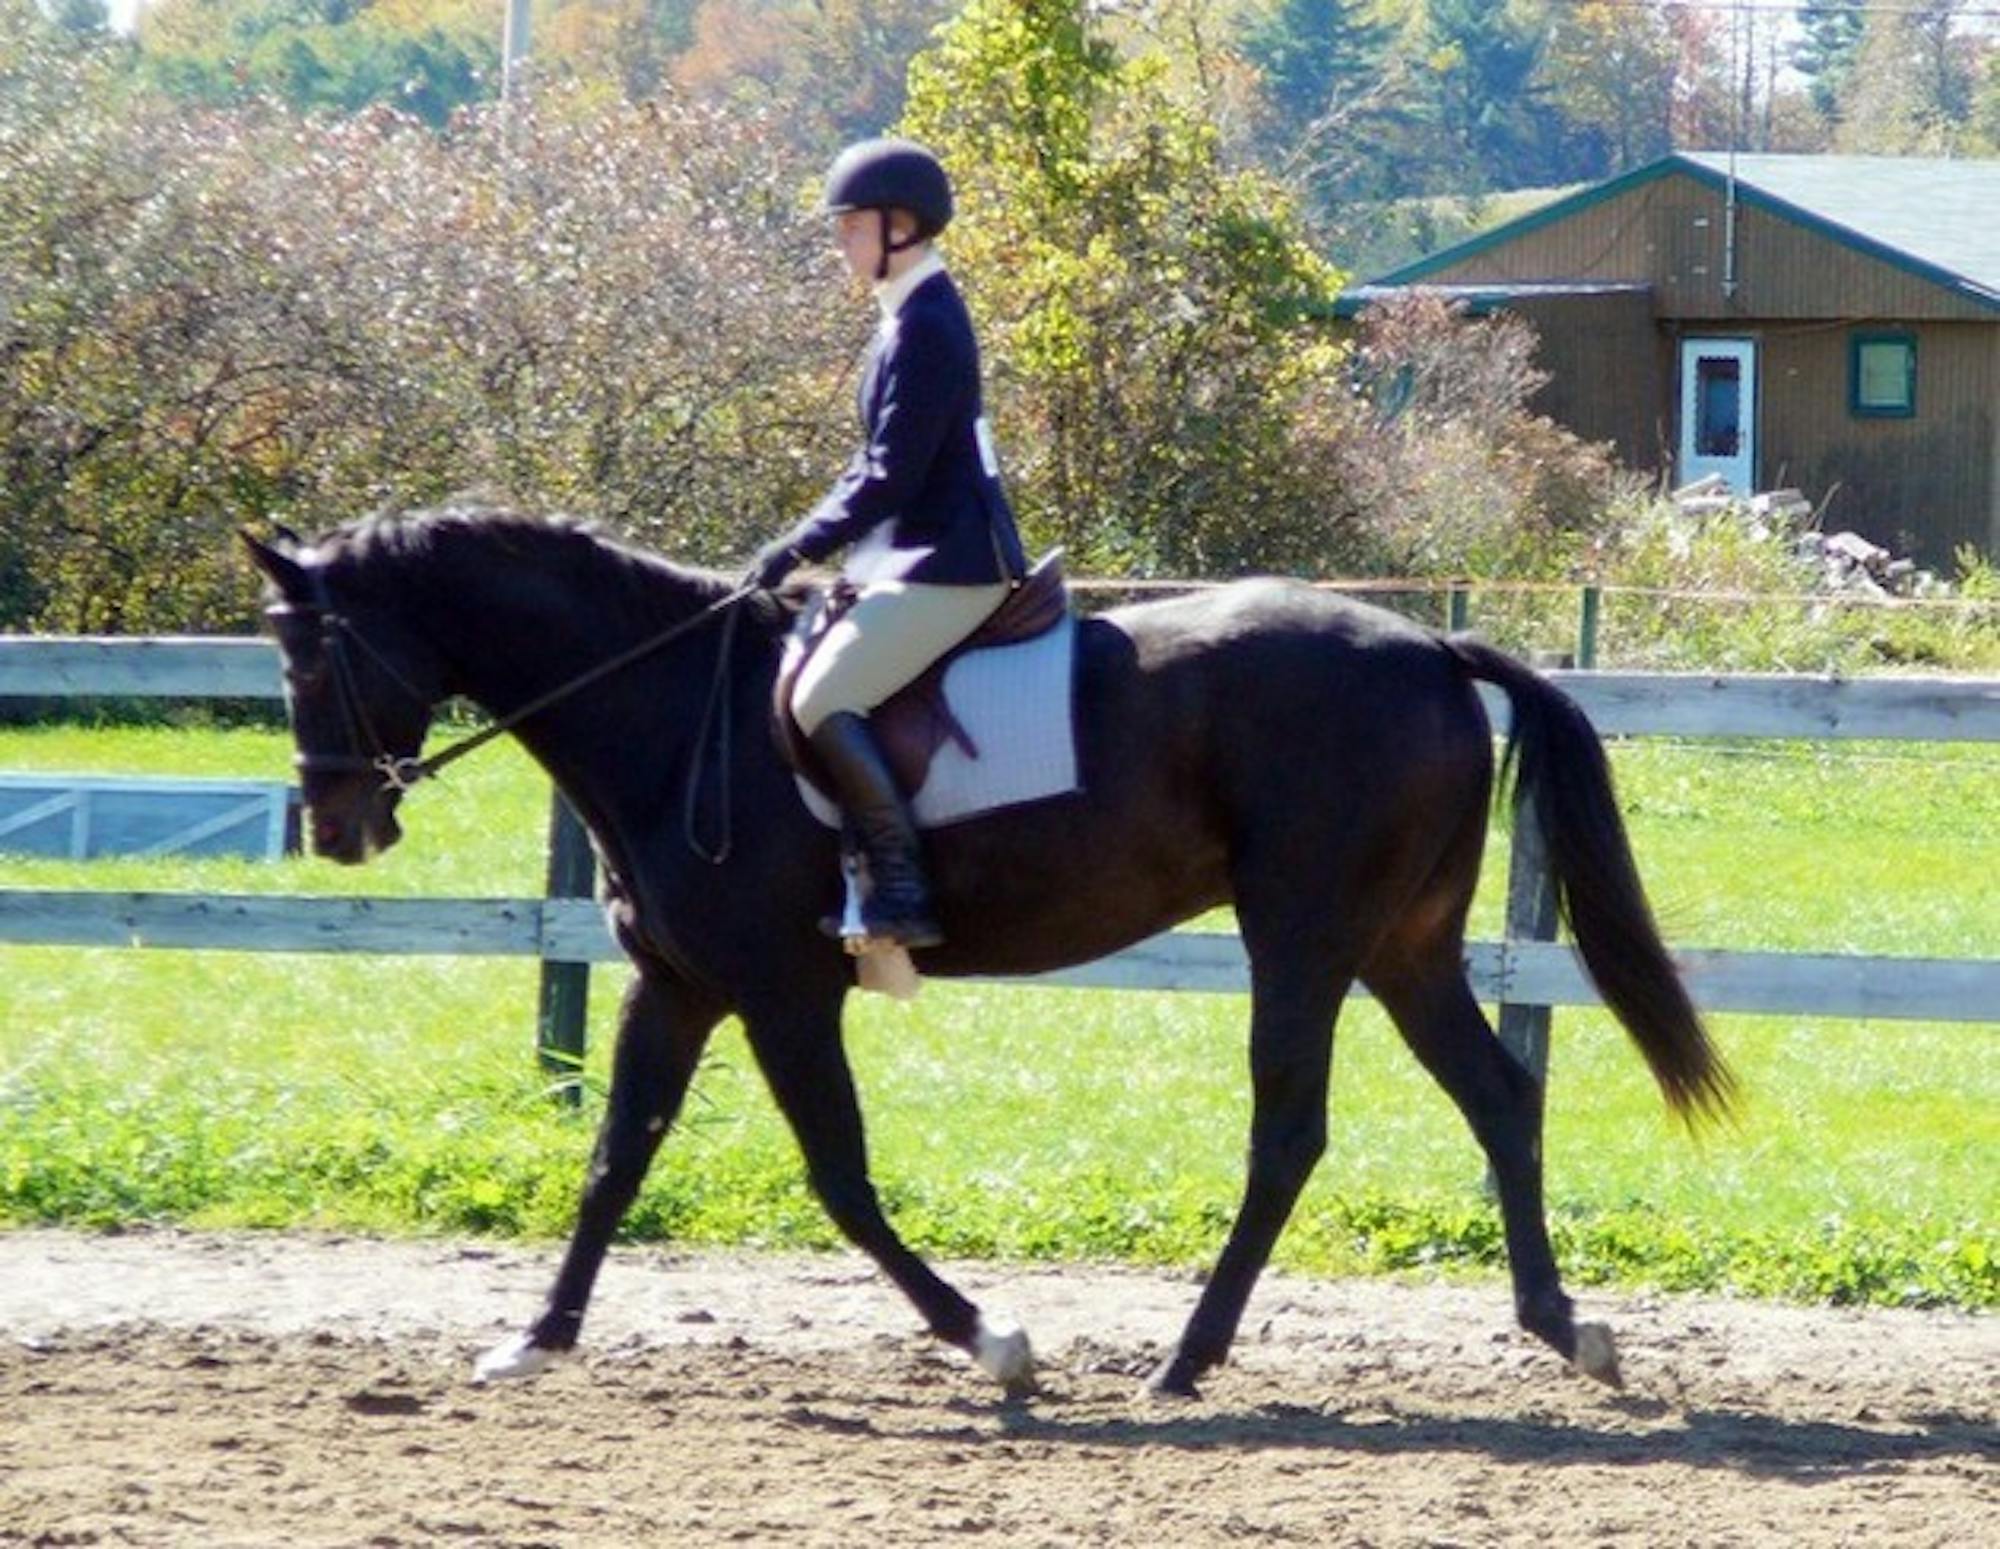 The Dartmouth equestrian team placed higher than seven of the ten schools at the Middlebury Horse Show.